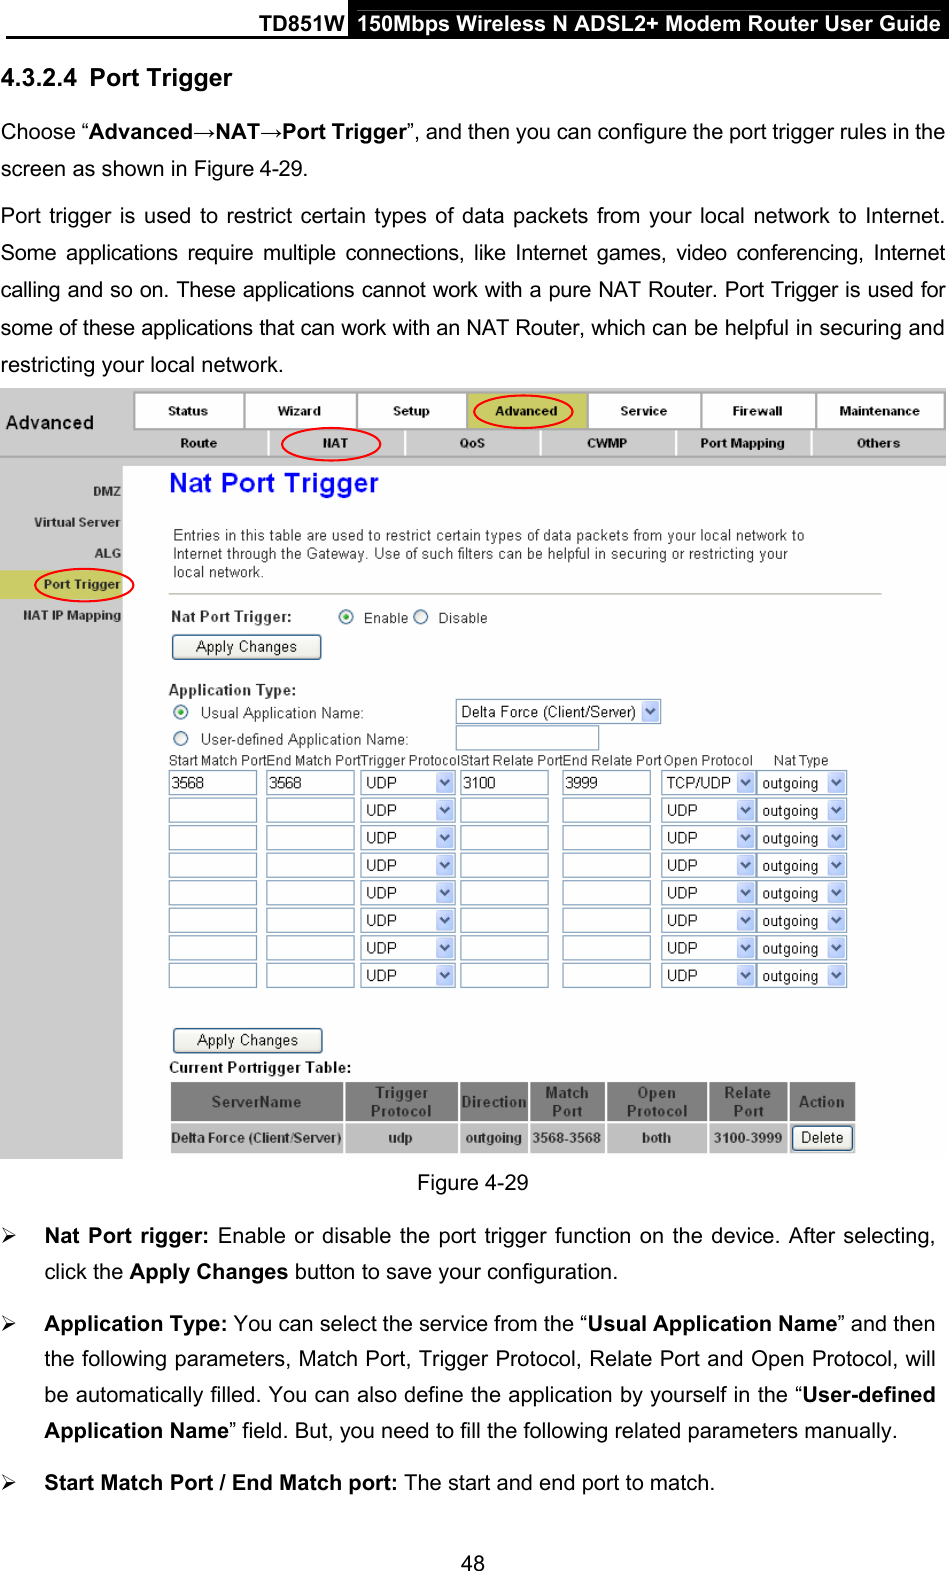 TD851W  150Mbps Wireless N ADSL2+ Modem Router User Guide 4.3.2.4  Port Trigger Choose “Advanced→NAT→Port Trigger”, and then you can configure the port trigger rules in the screen as shown in Figure 4-29.  Port trigger is used to restrict certain types of data packets from your local network to Internet. Some applications require multiple connections, like Internet games, video conferencing, Internet calling and so on. These applications cannot work with a pure NAT Router. Port Trigger is used for some of these applications that can work with an NAT Router, which can be helpful in securing and restricting your local network.  Figure 4-29 ¾ Nat Port rigger: Enable or disable the port trigger function on the device. After selecting, click the Apply Changes button to save your configuration. ¾ Application Type: You can select the service from the “Usual Application Name” and then the following parameters, Match Port, Trigger Protocol, Relate Port and Open Protocol, will be automatically filled. You can also define the application by yourself in the “User-defined Application Name” field. But, you need to fill the following related parameters manually.   ¾ Start Match Port / End Match port: The start and end port to match. 48 